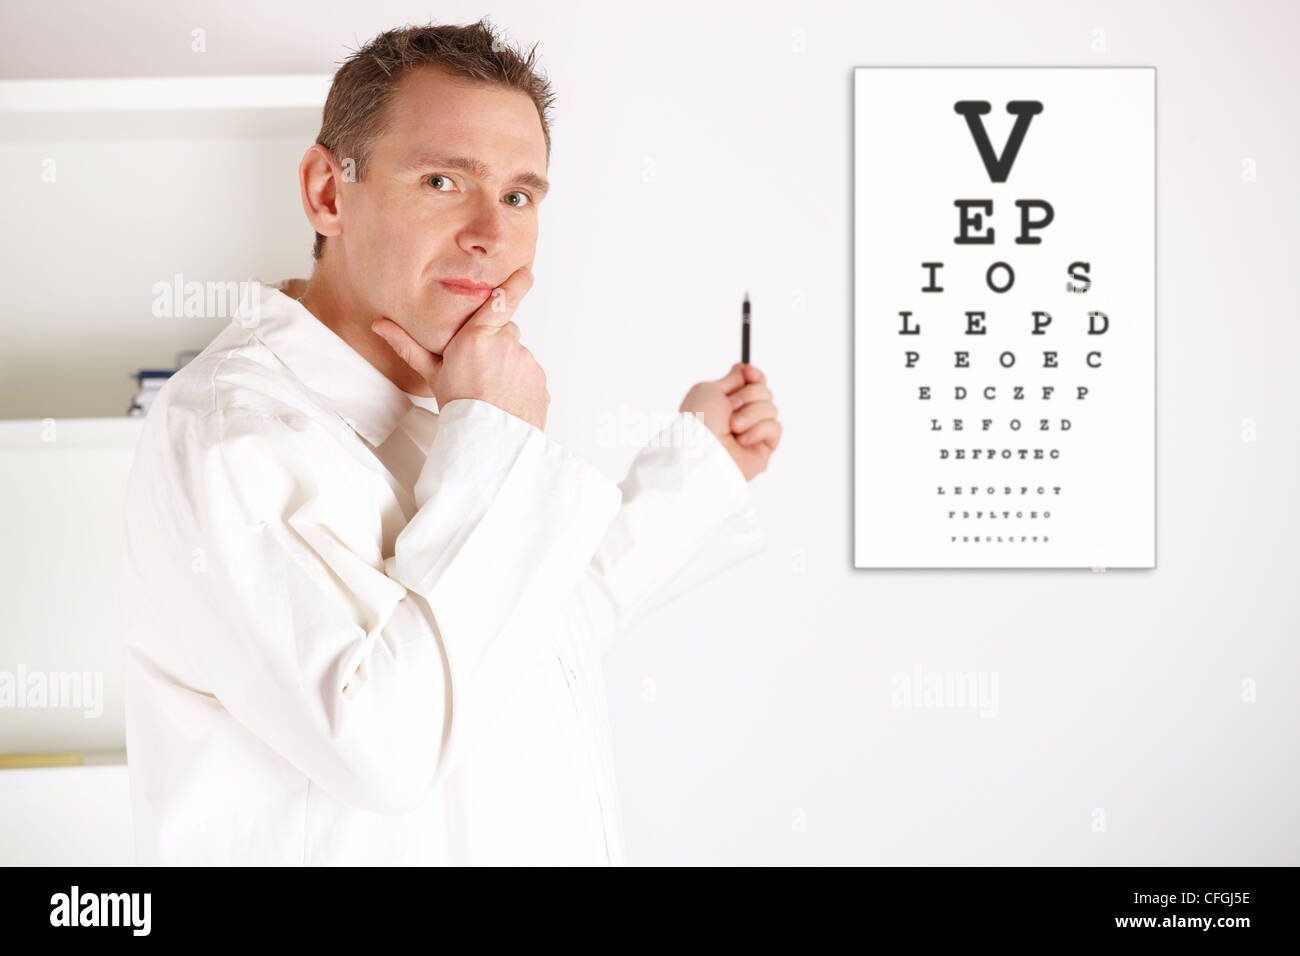 Serious male oculist doctor with an eye chart behind him. Worried about examined patient sight. Stock Photo